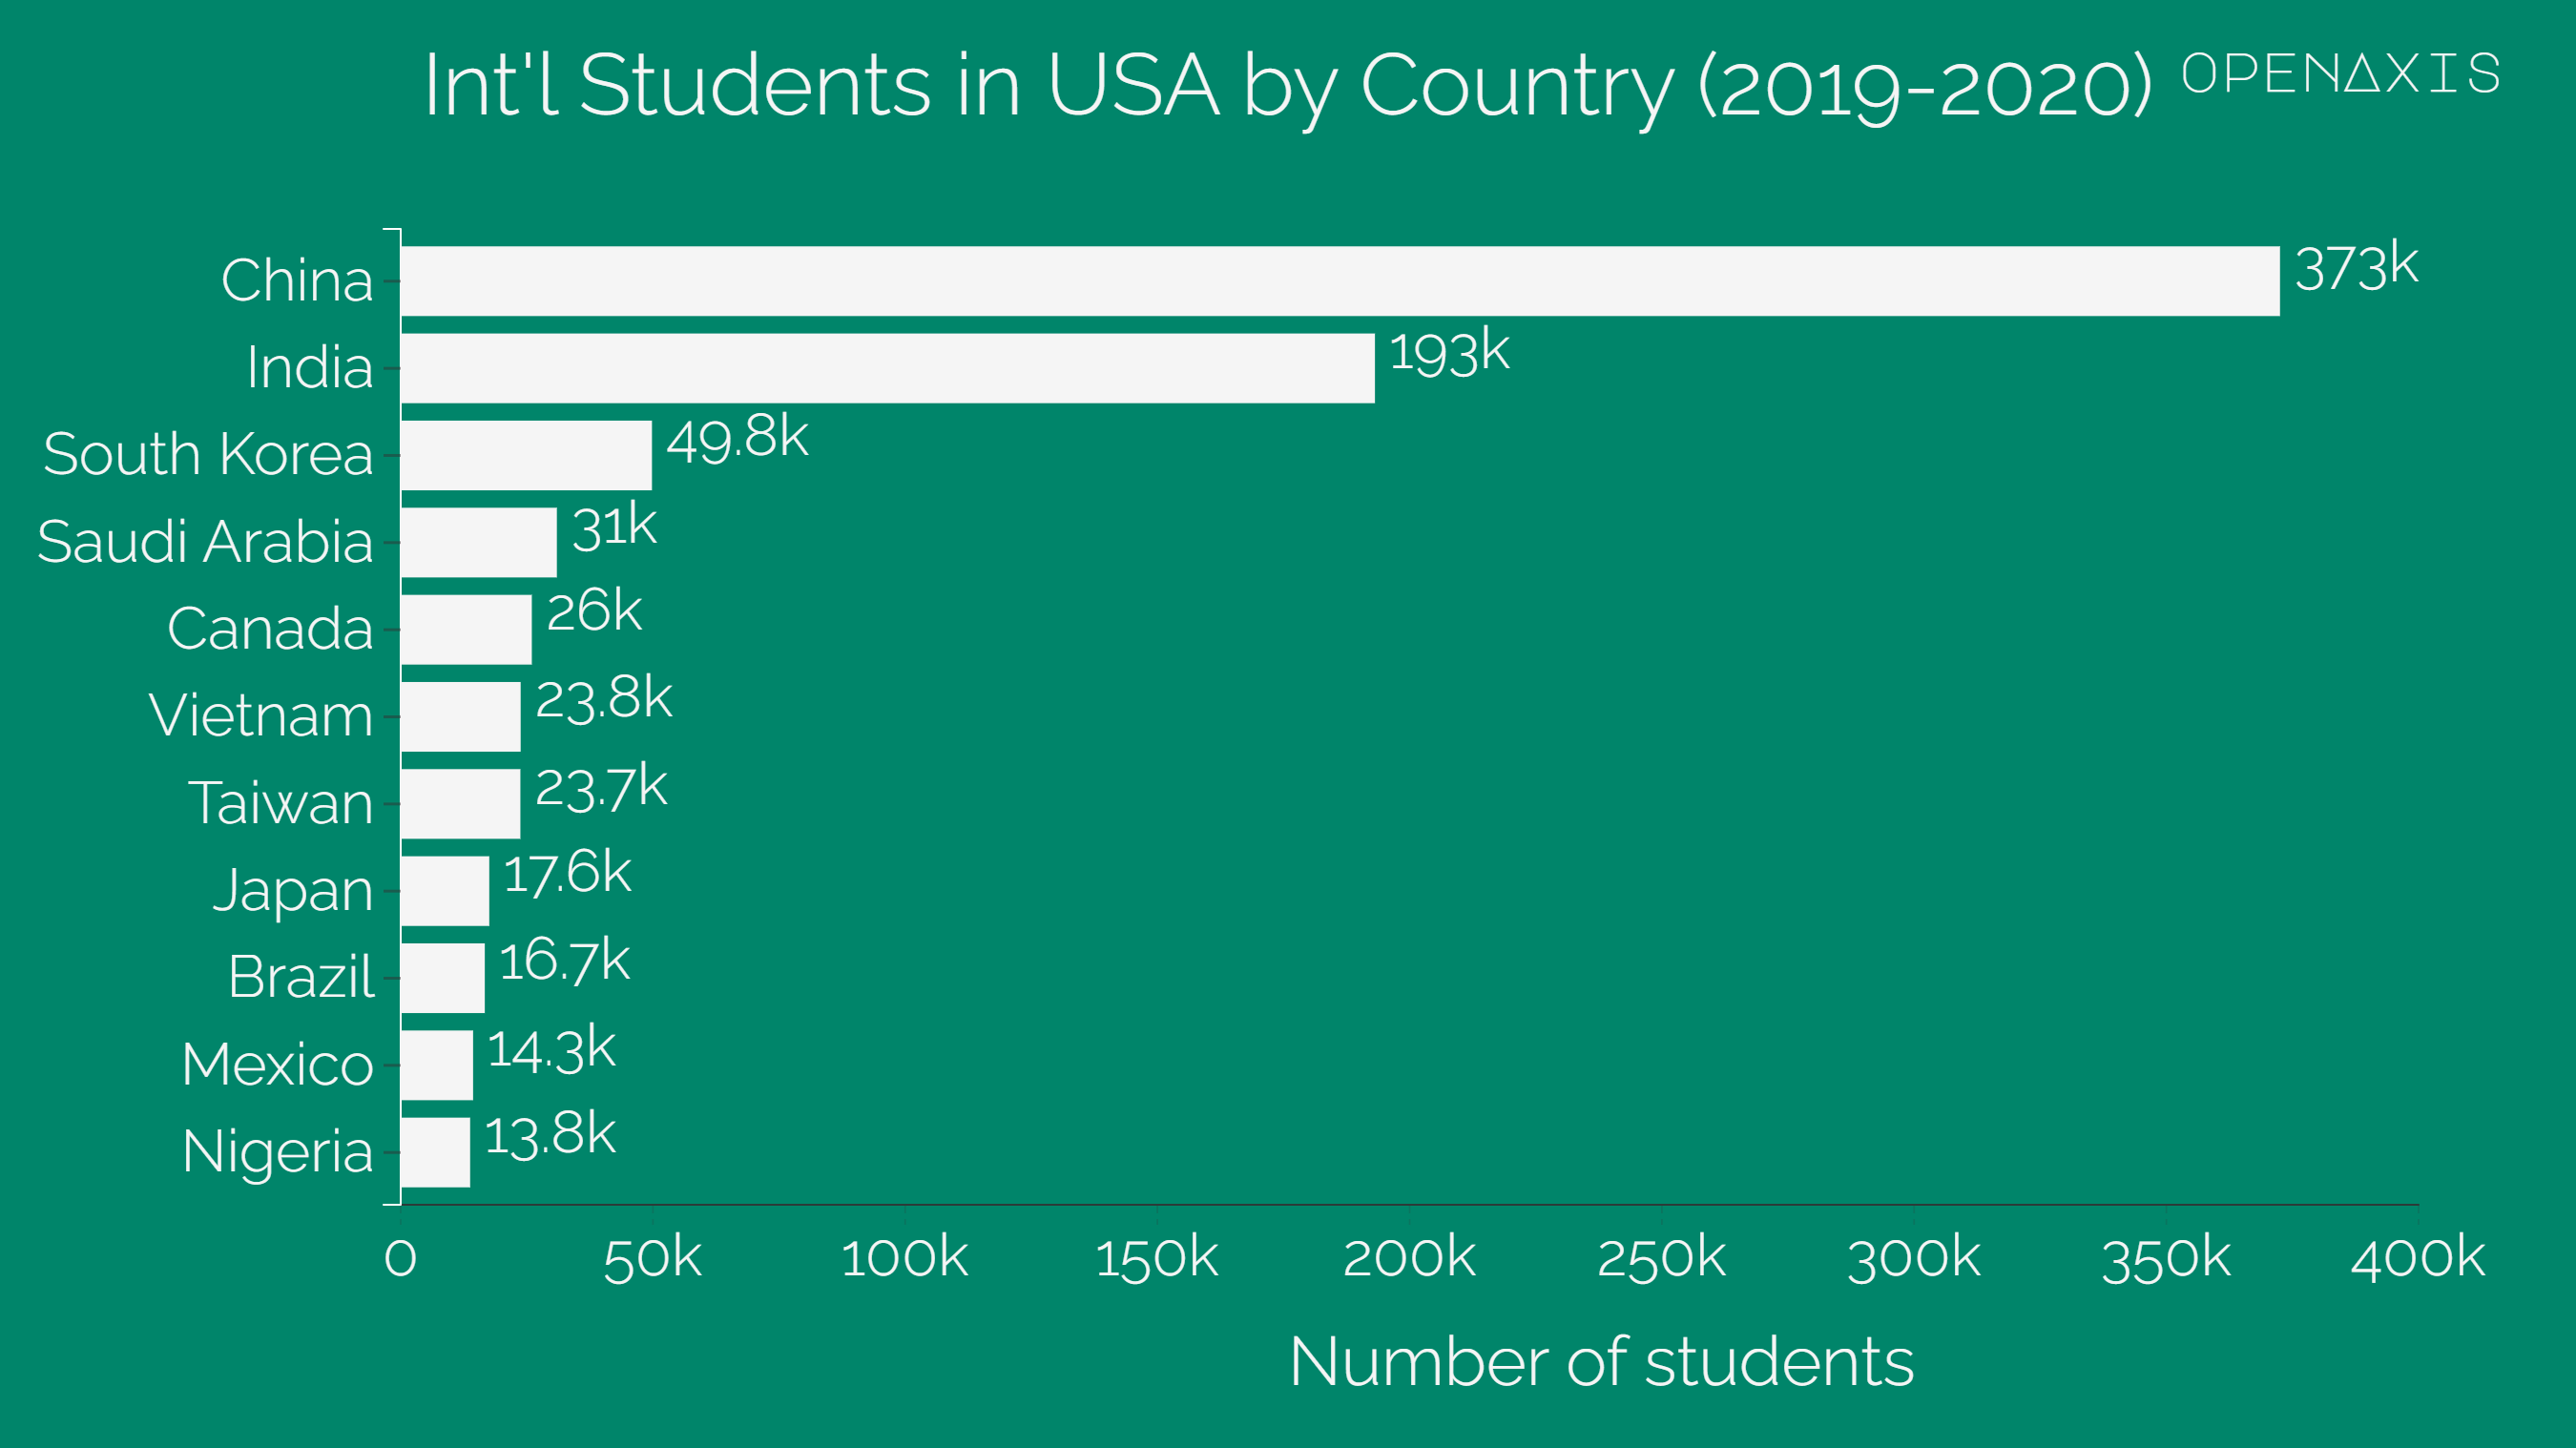 "Int'l Students in USA by Country (2019-2020)"